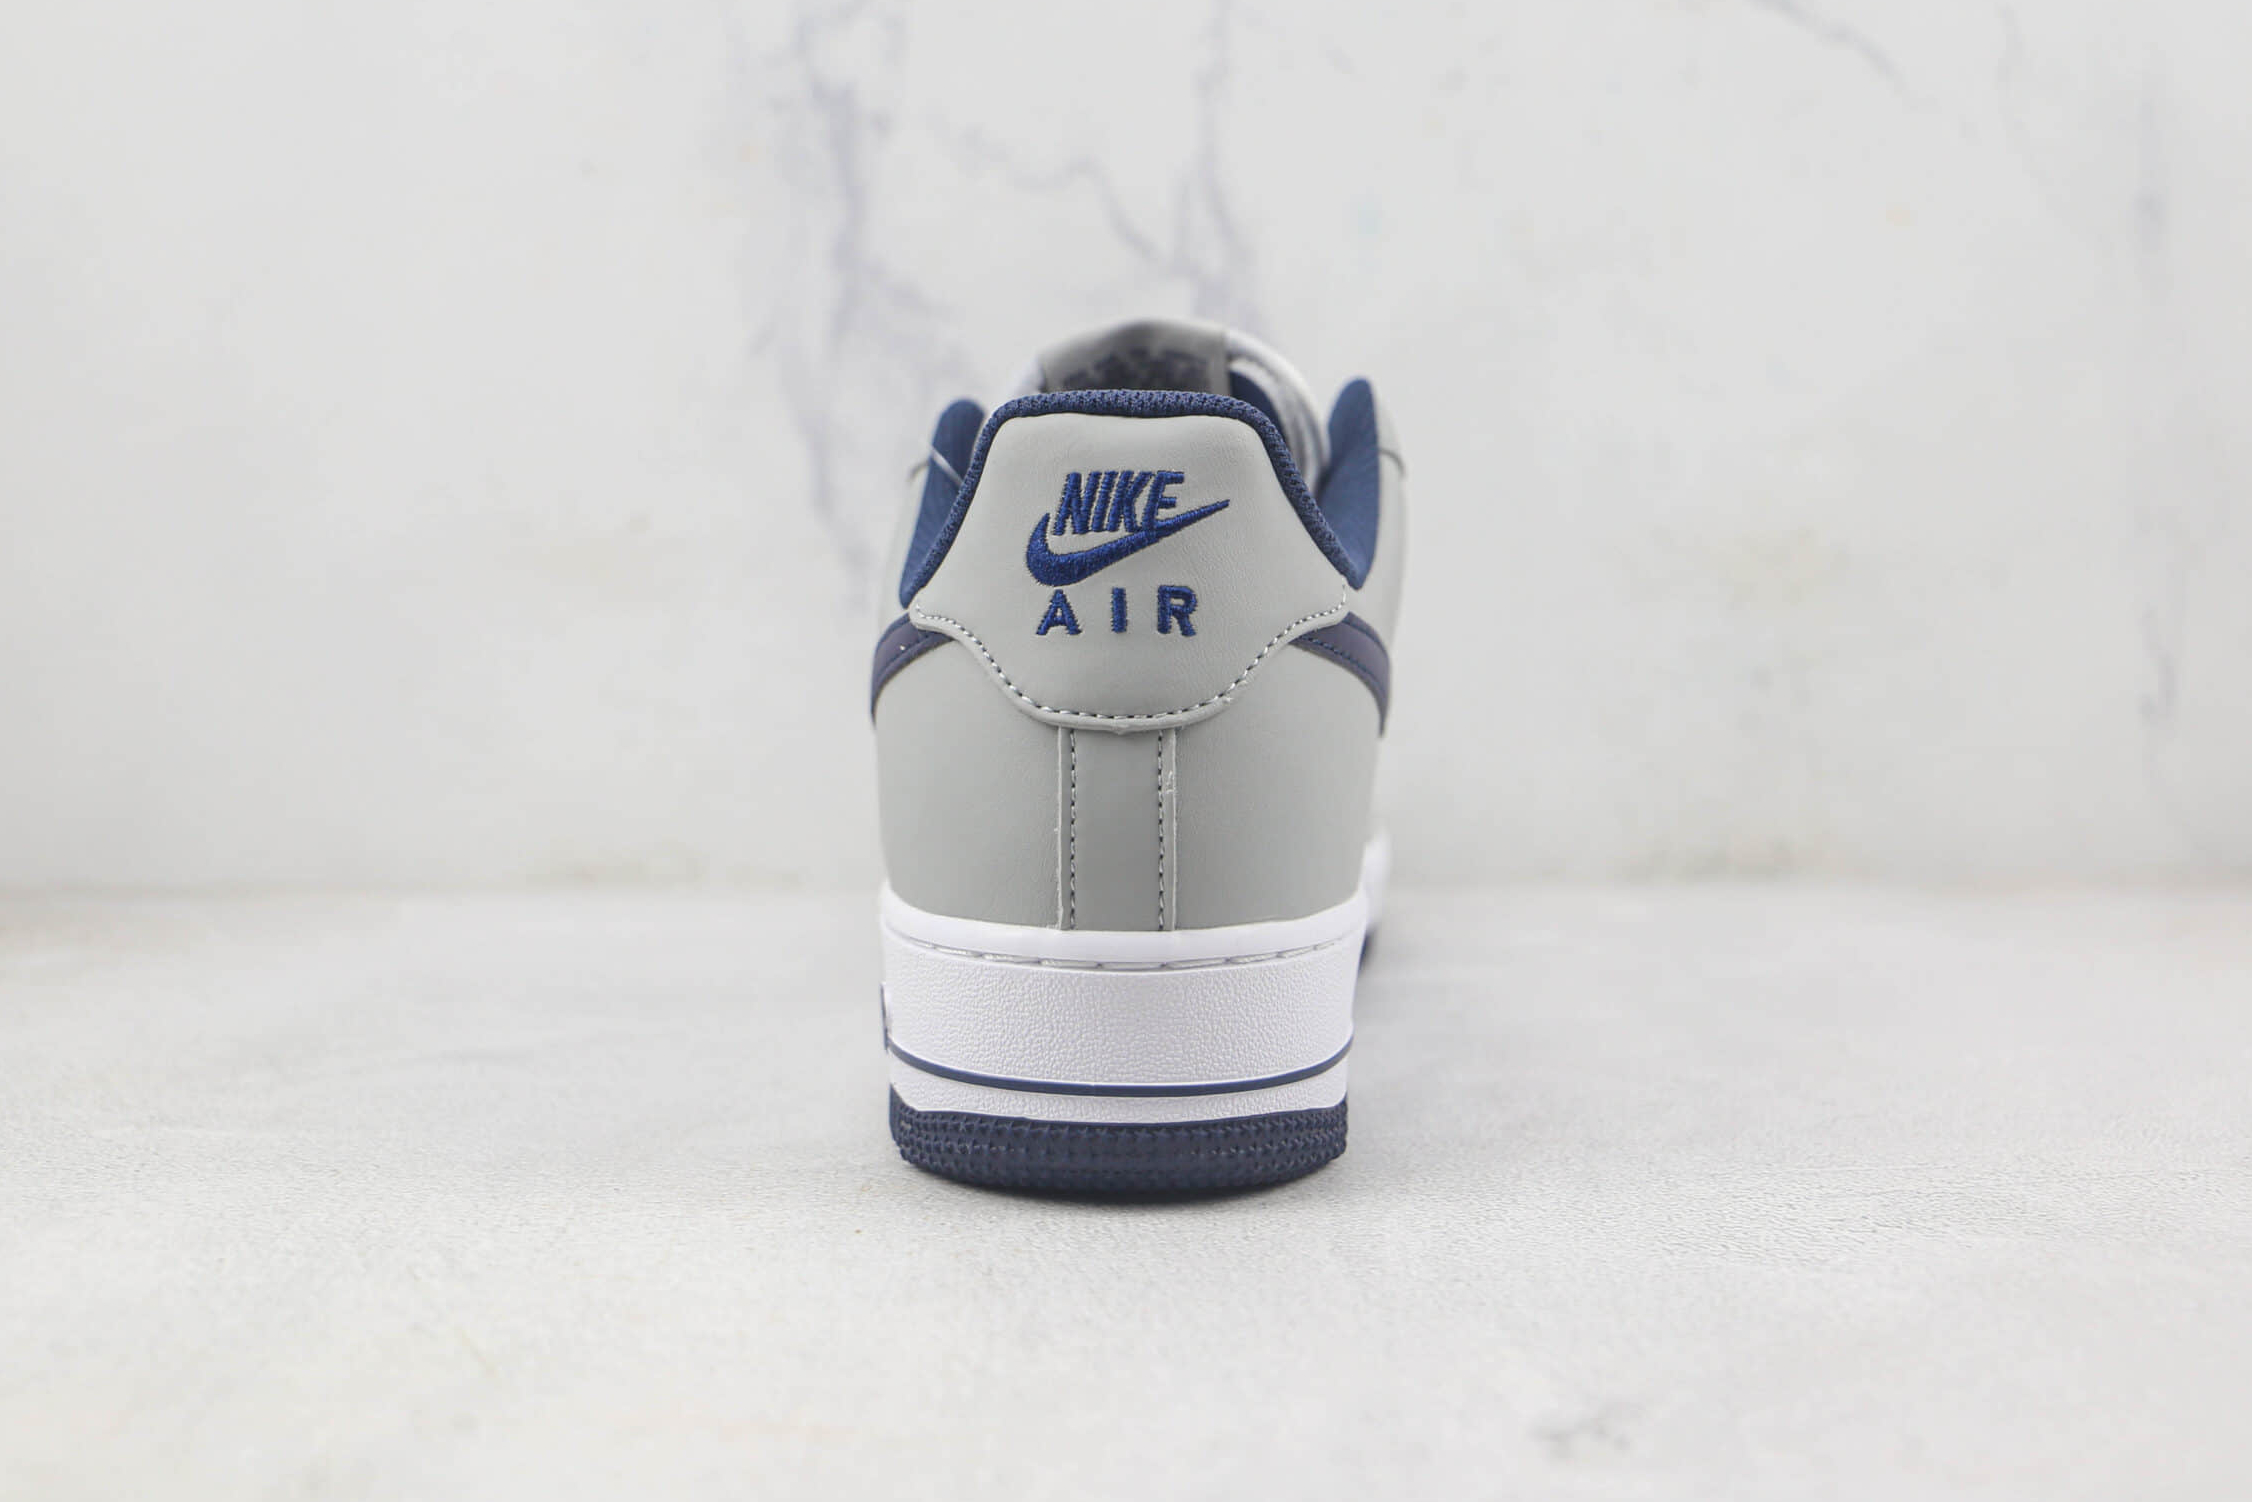 Nike Air Force 1 07 Low Grey Blue White KU5696-002 - Stylish and Iconic Sneakers